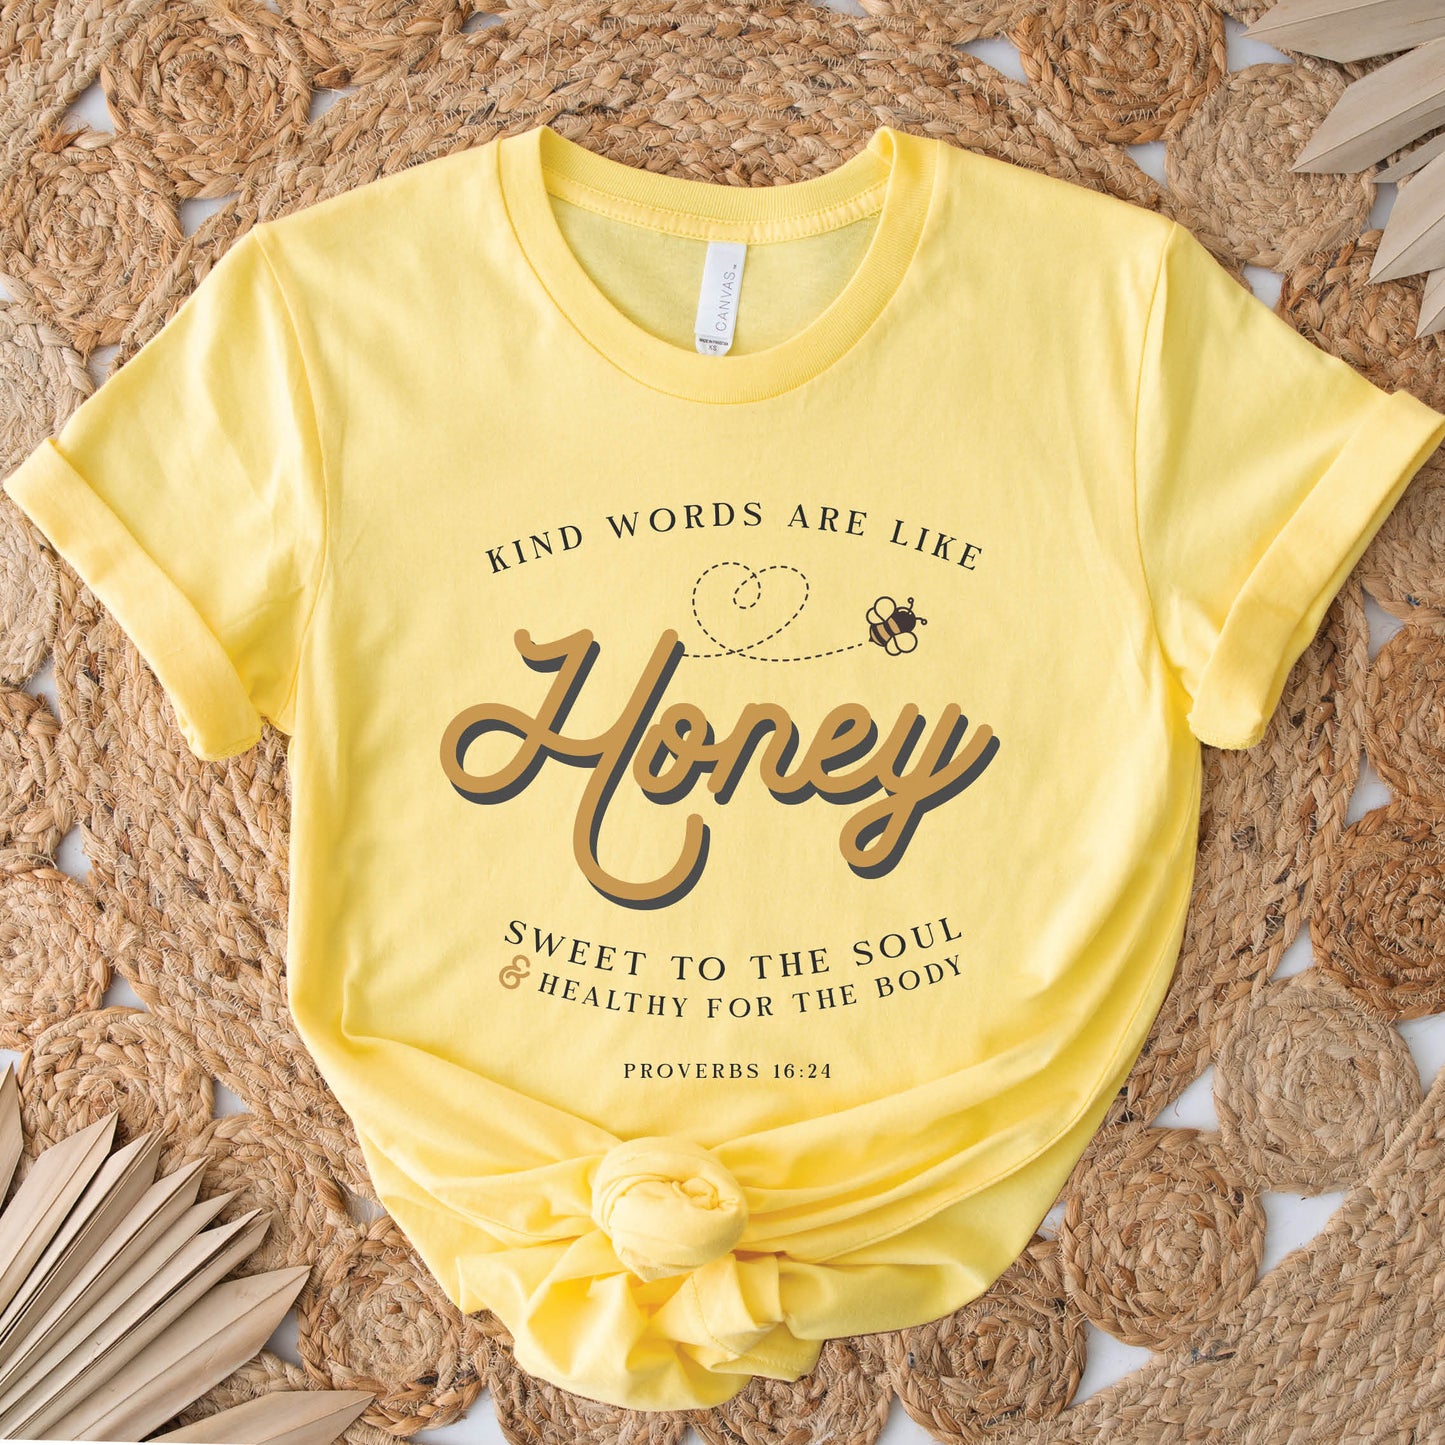 Yellow & gold Christian aesthetic unisex faith-based kindness bee t-shirt for women with Proverbs 16:24 bible verse quote that says, "Kind Words Are Like Honey, Sweet To the Soul, and Healthy For the Body" 